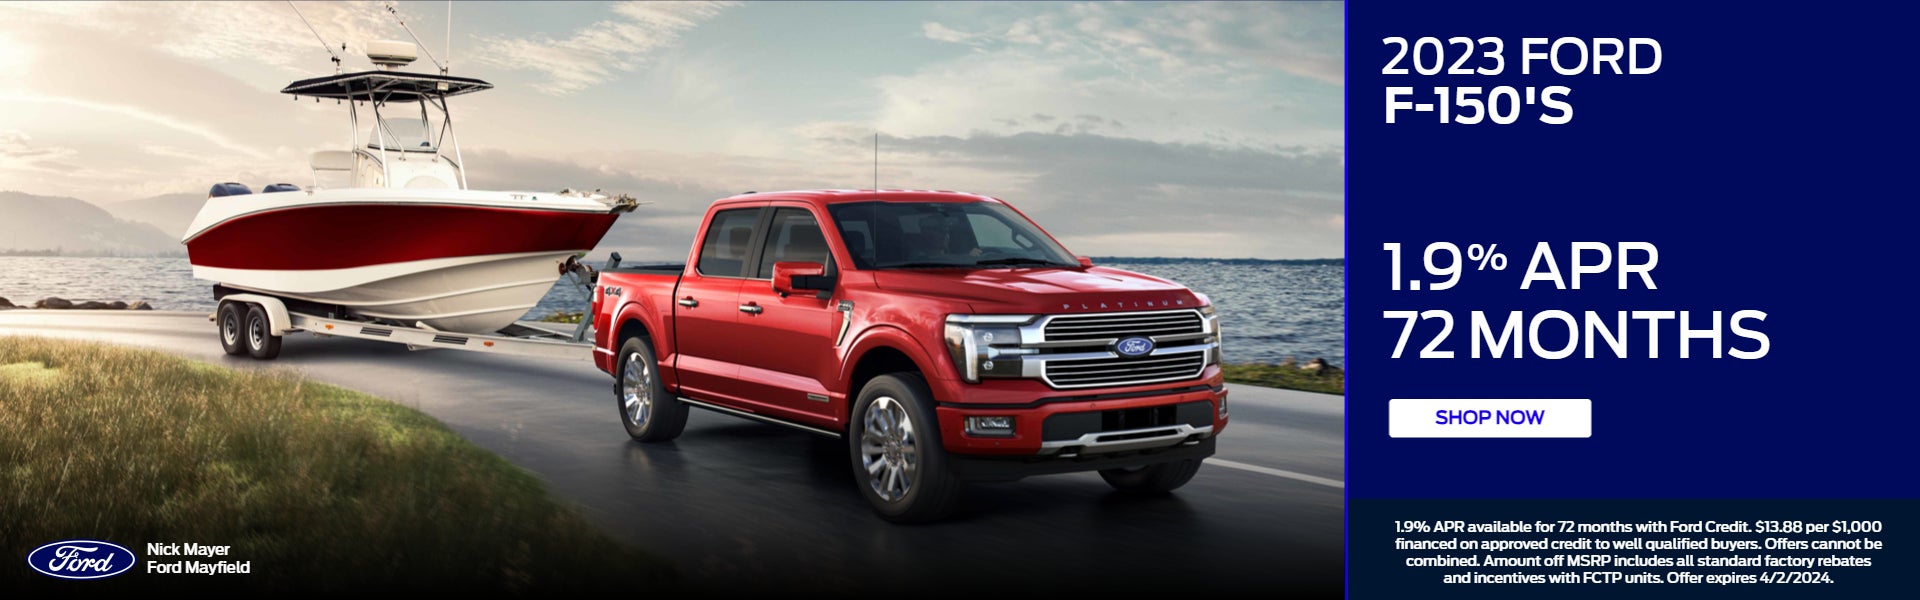 2023 F-150, 1.9% for 72 months